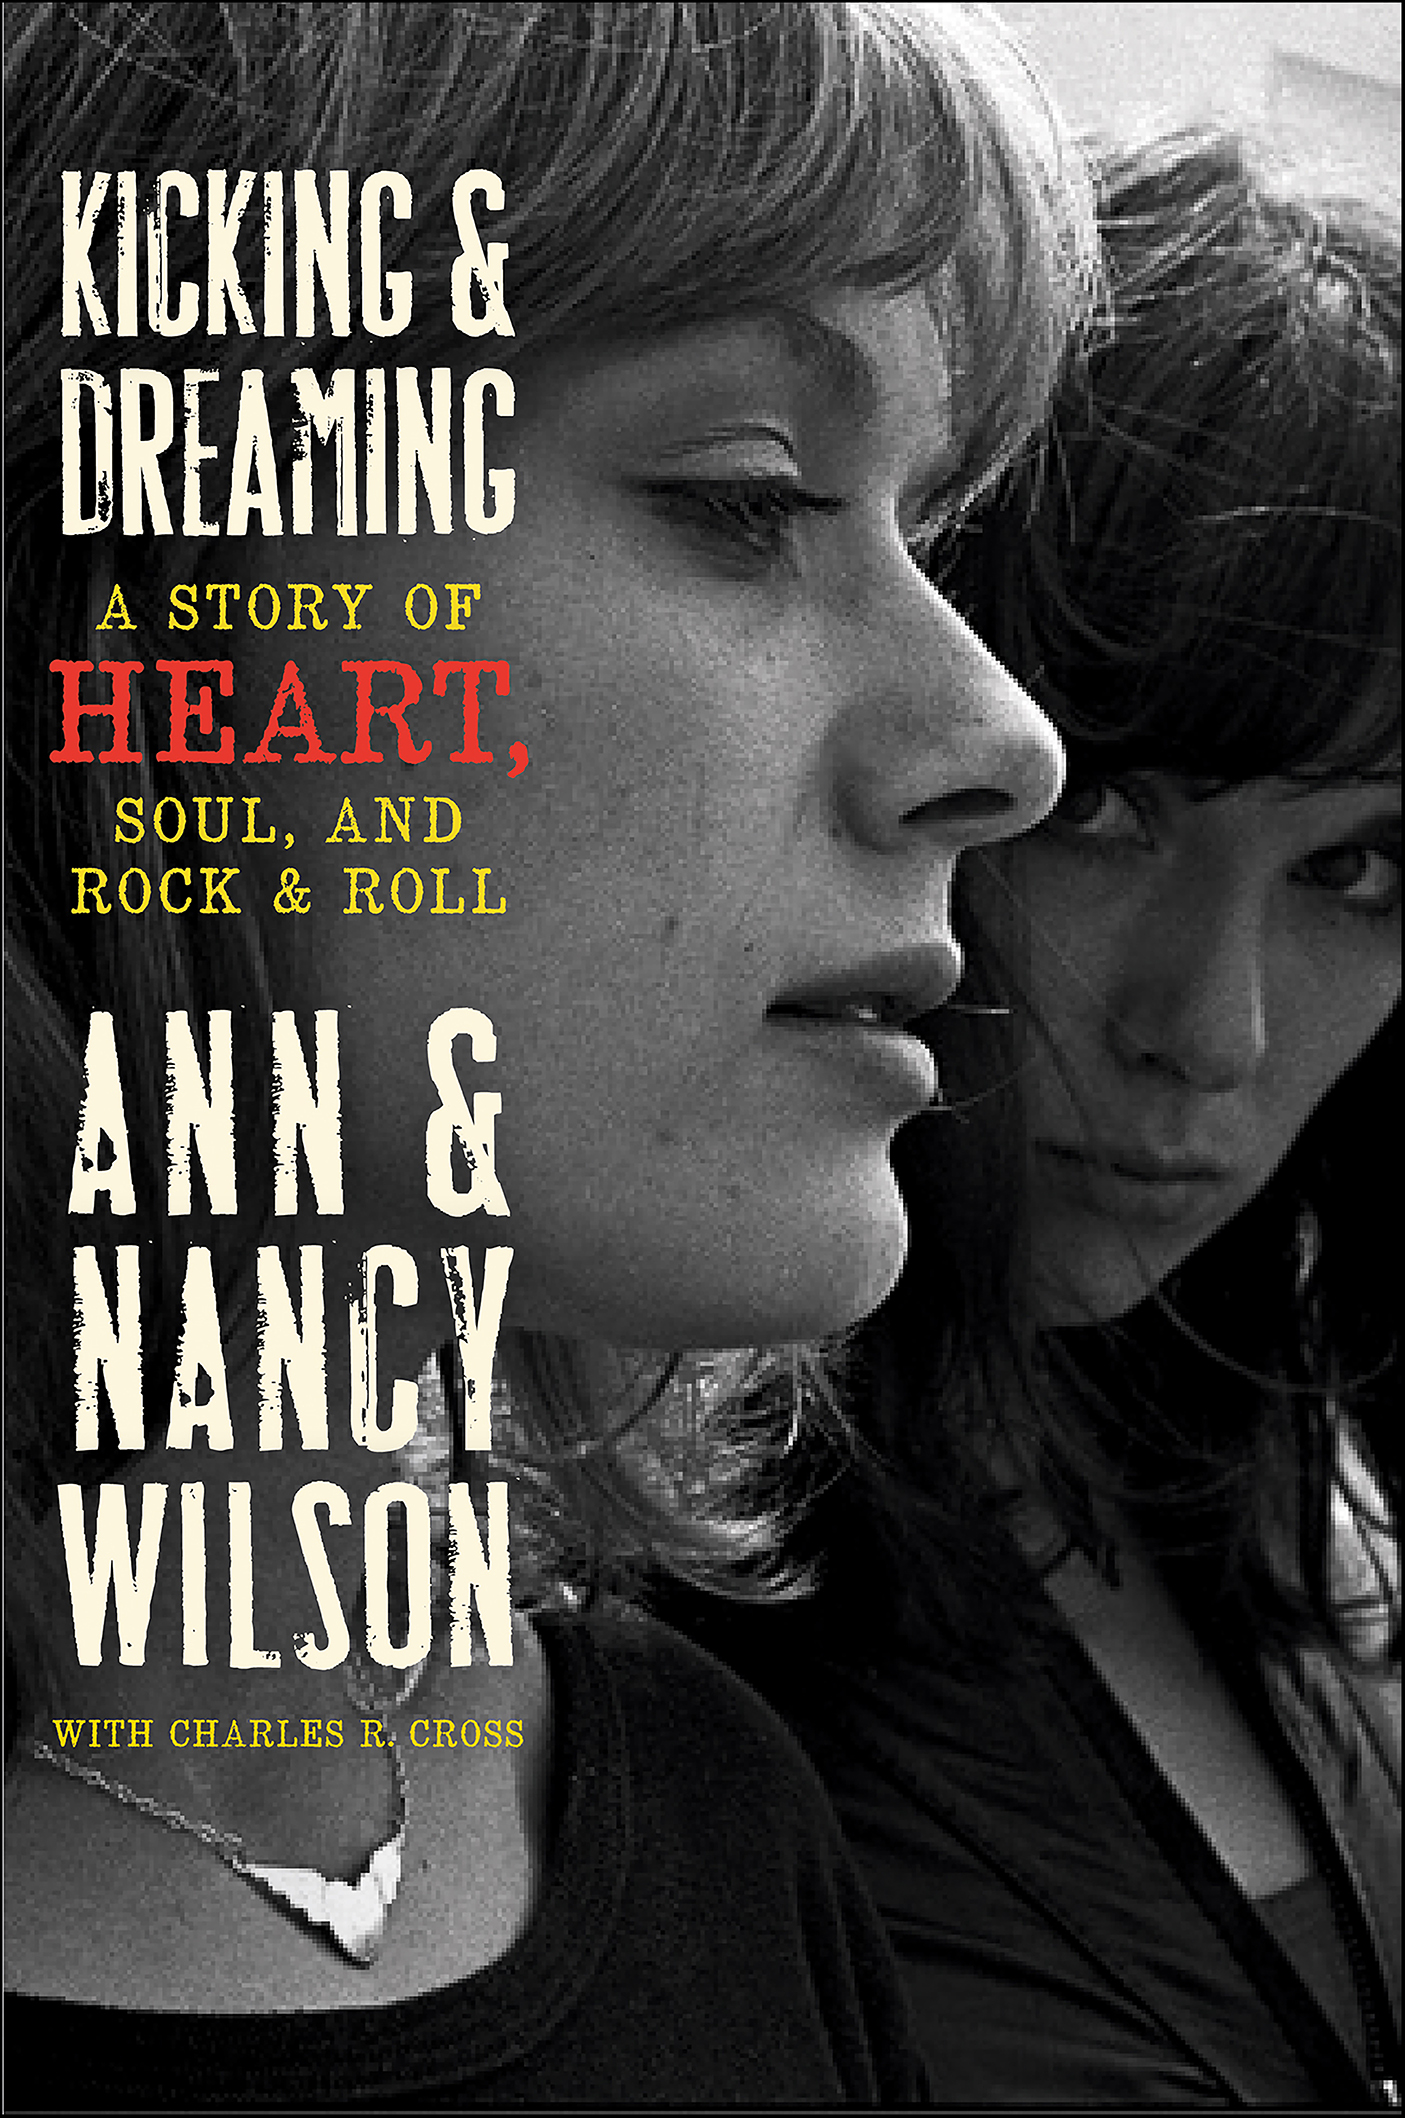 Kicking & dreaming a story of Heart, soul, and rock and roll cover image